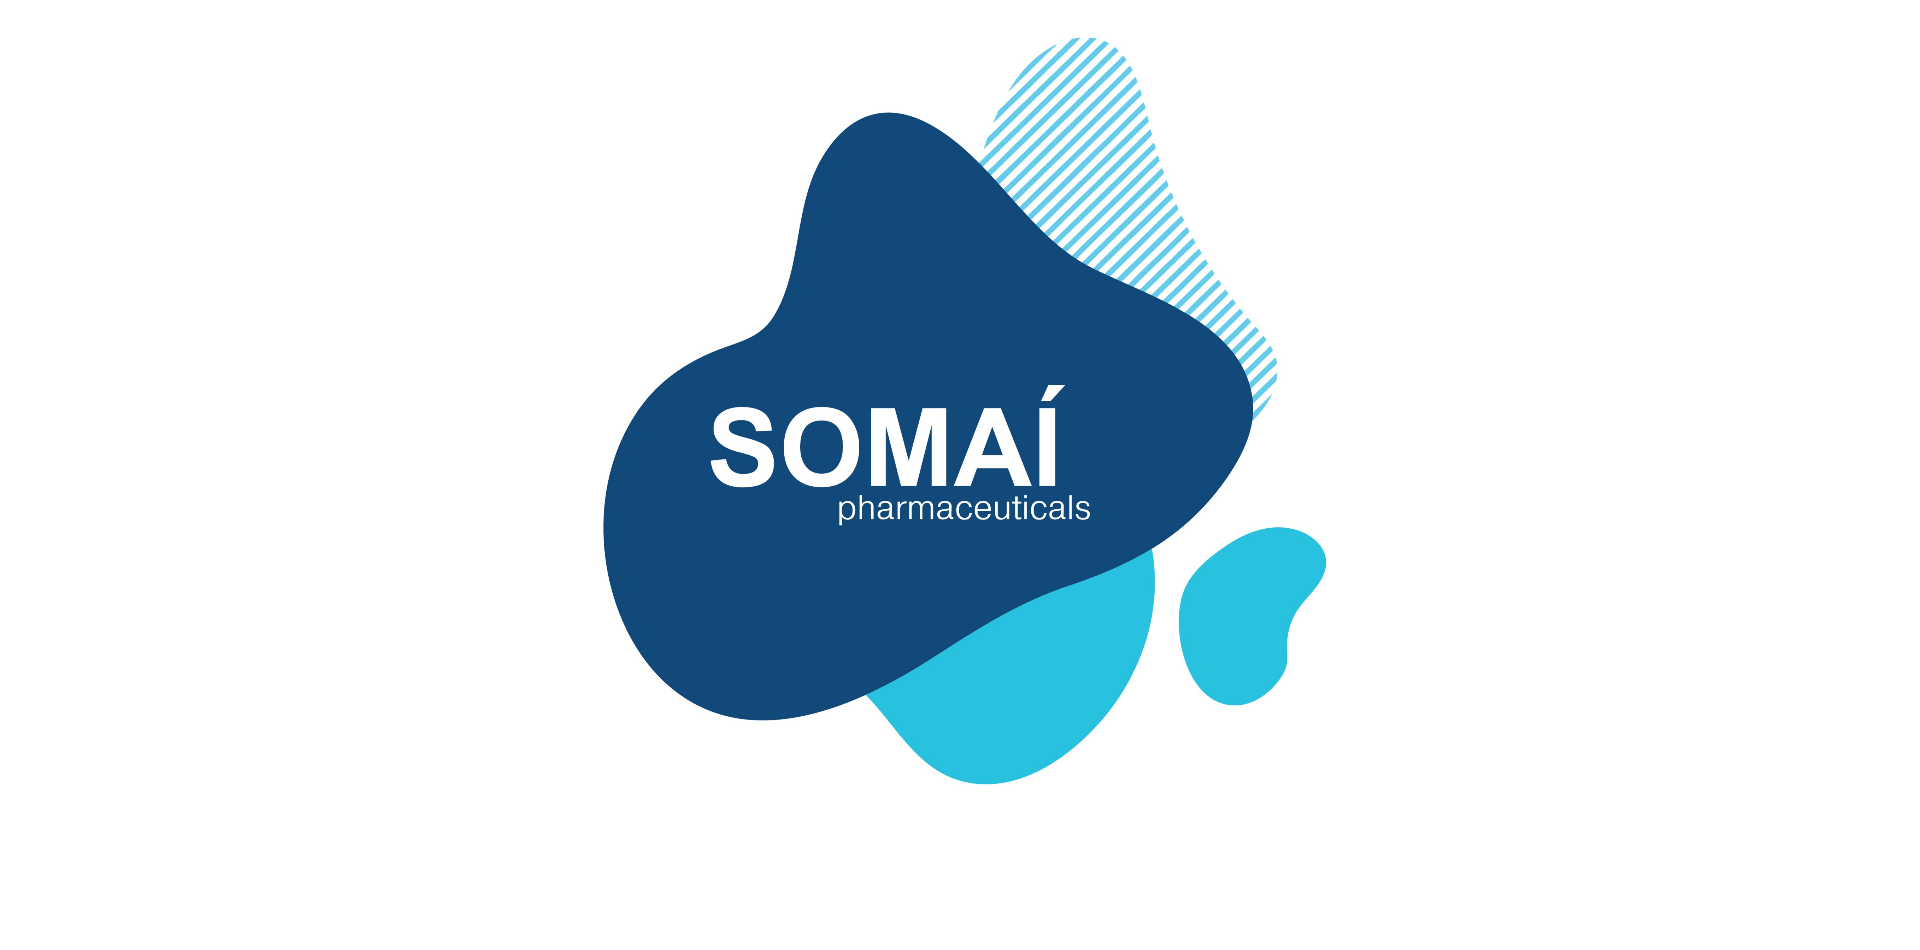 SOMAÍ Pharmaceuticals awarded €2.7M in funding from Portugal 2020 Grant